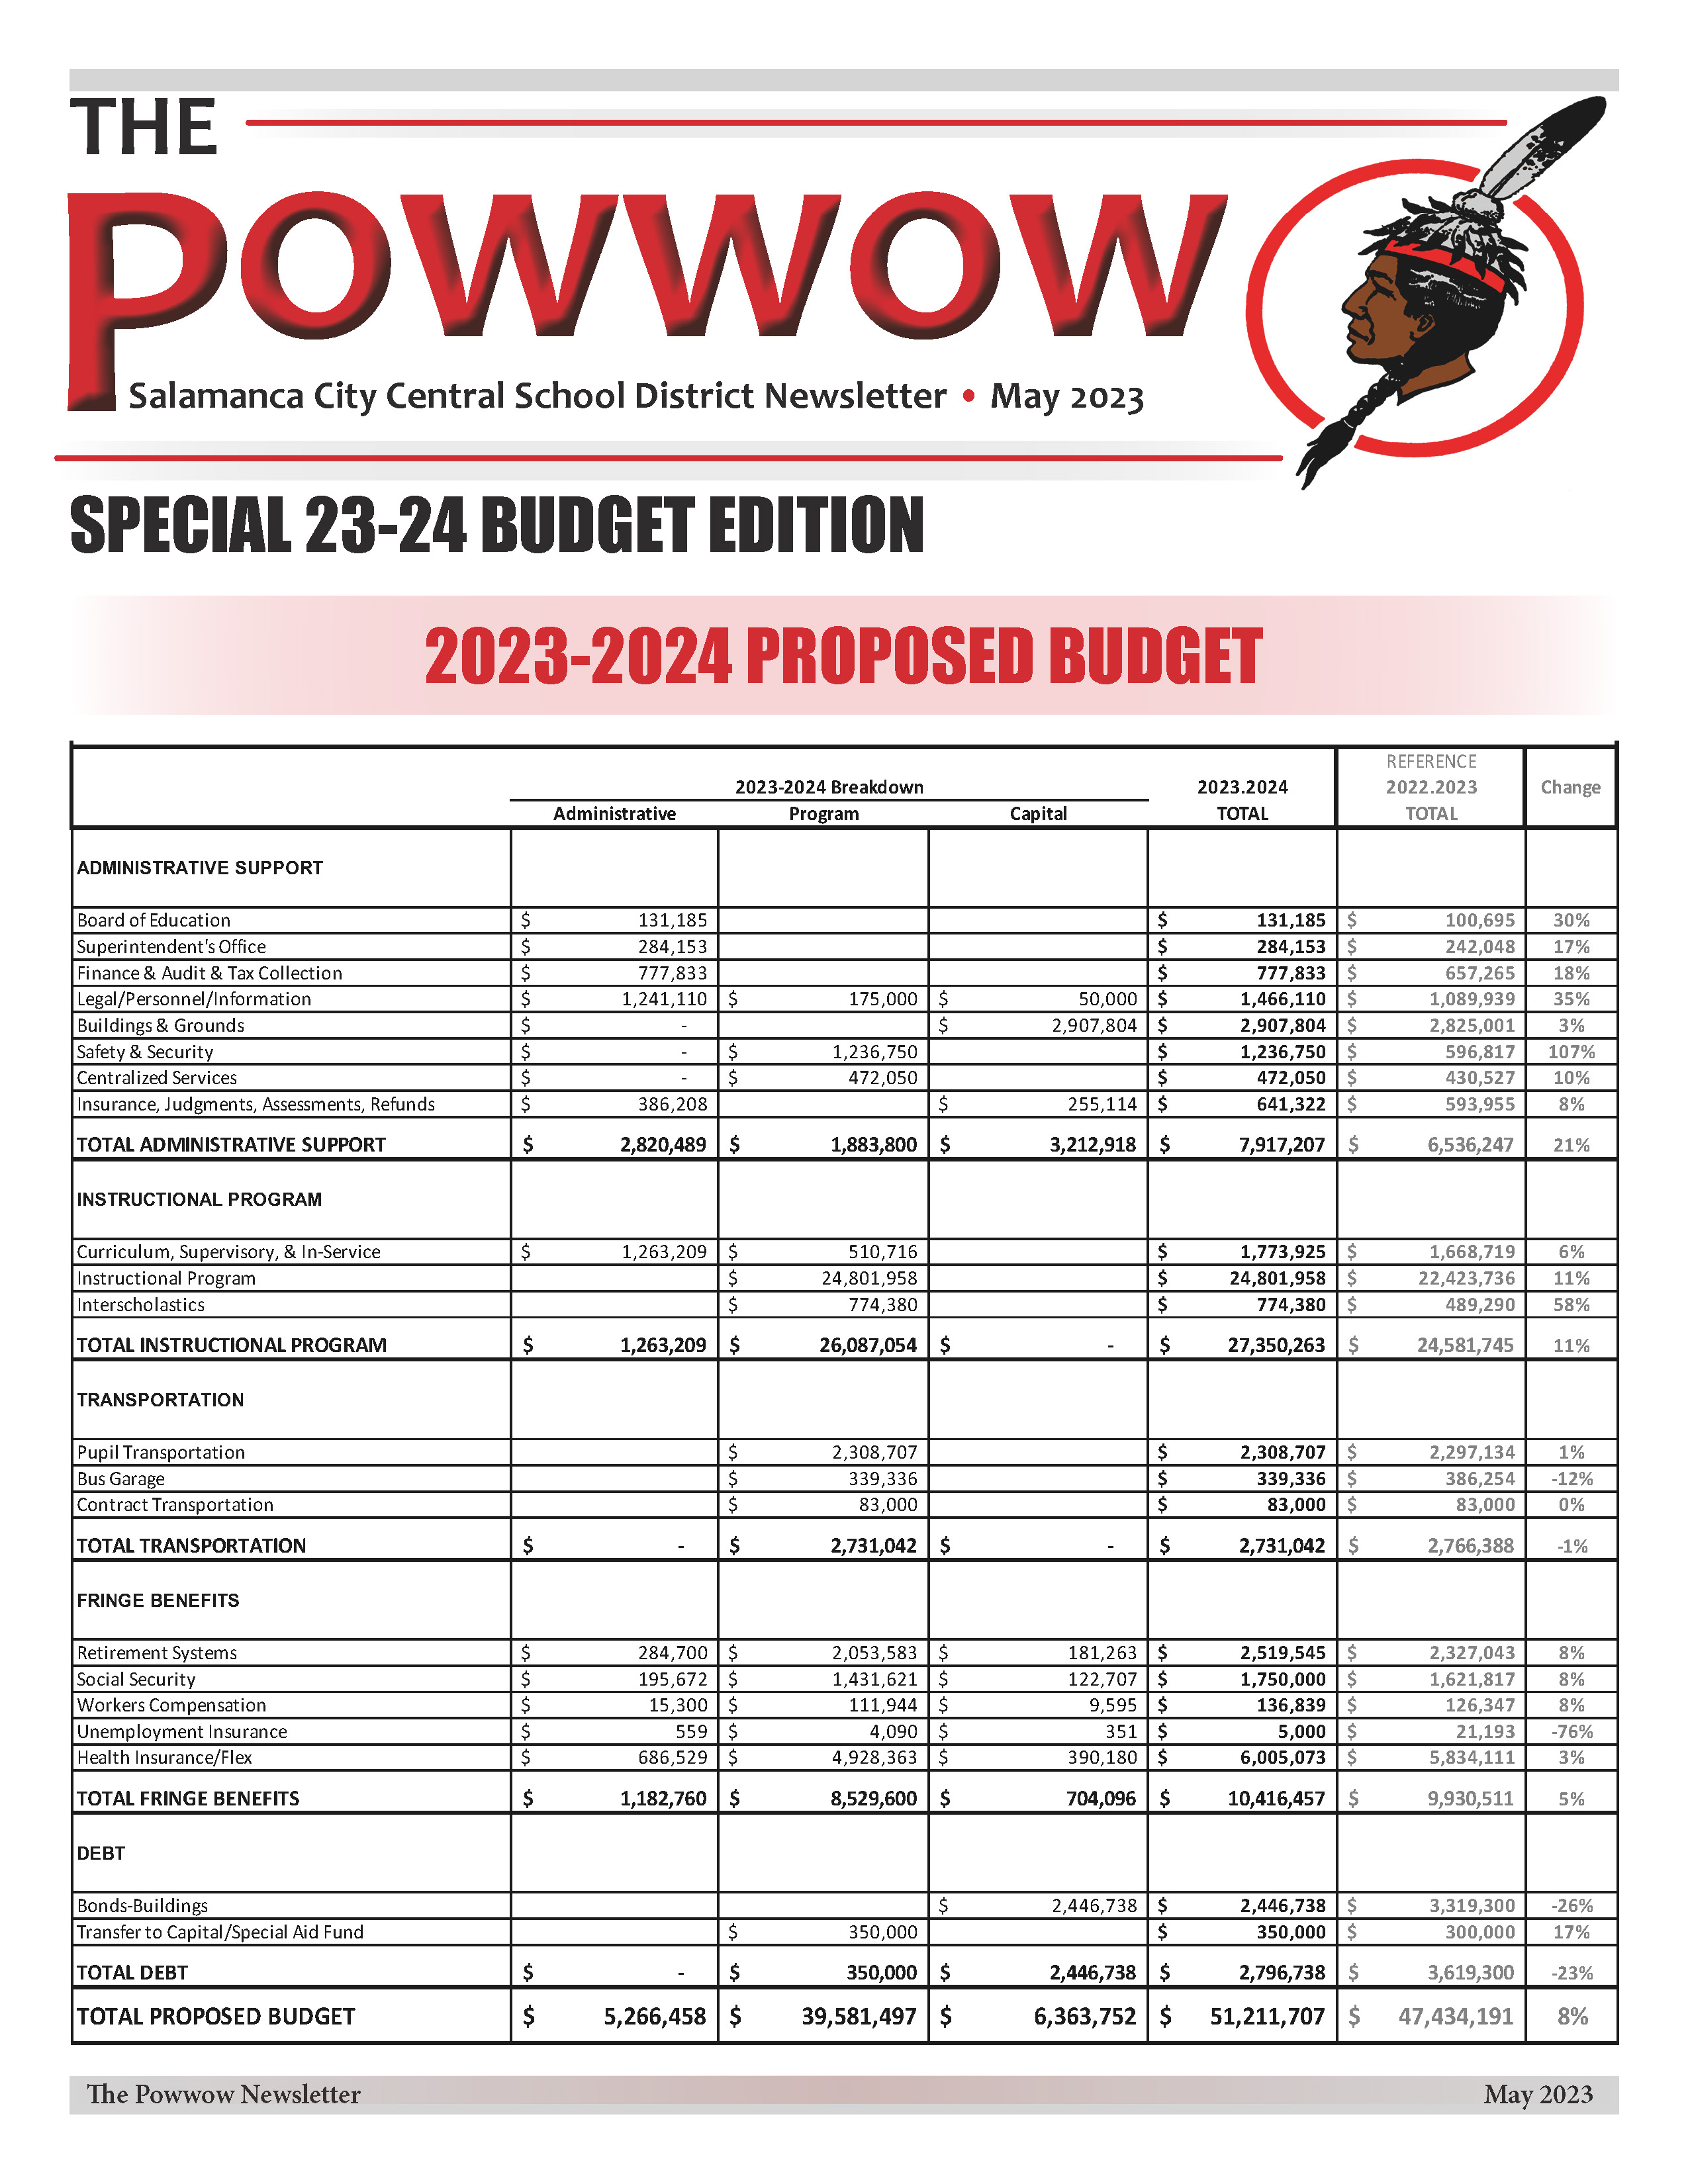 Budget Mailer Coming Soon